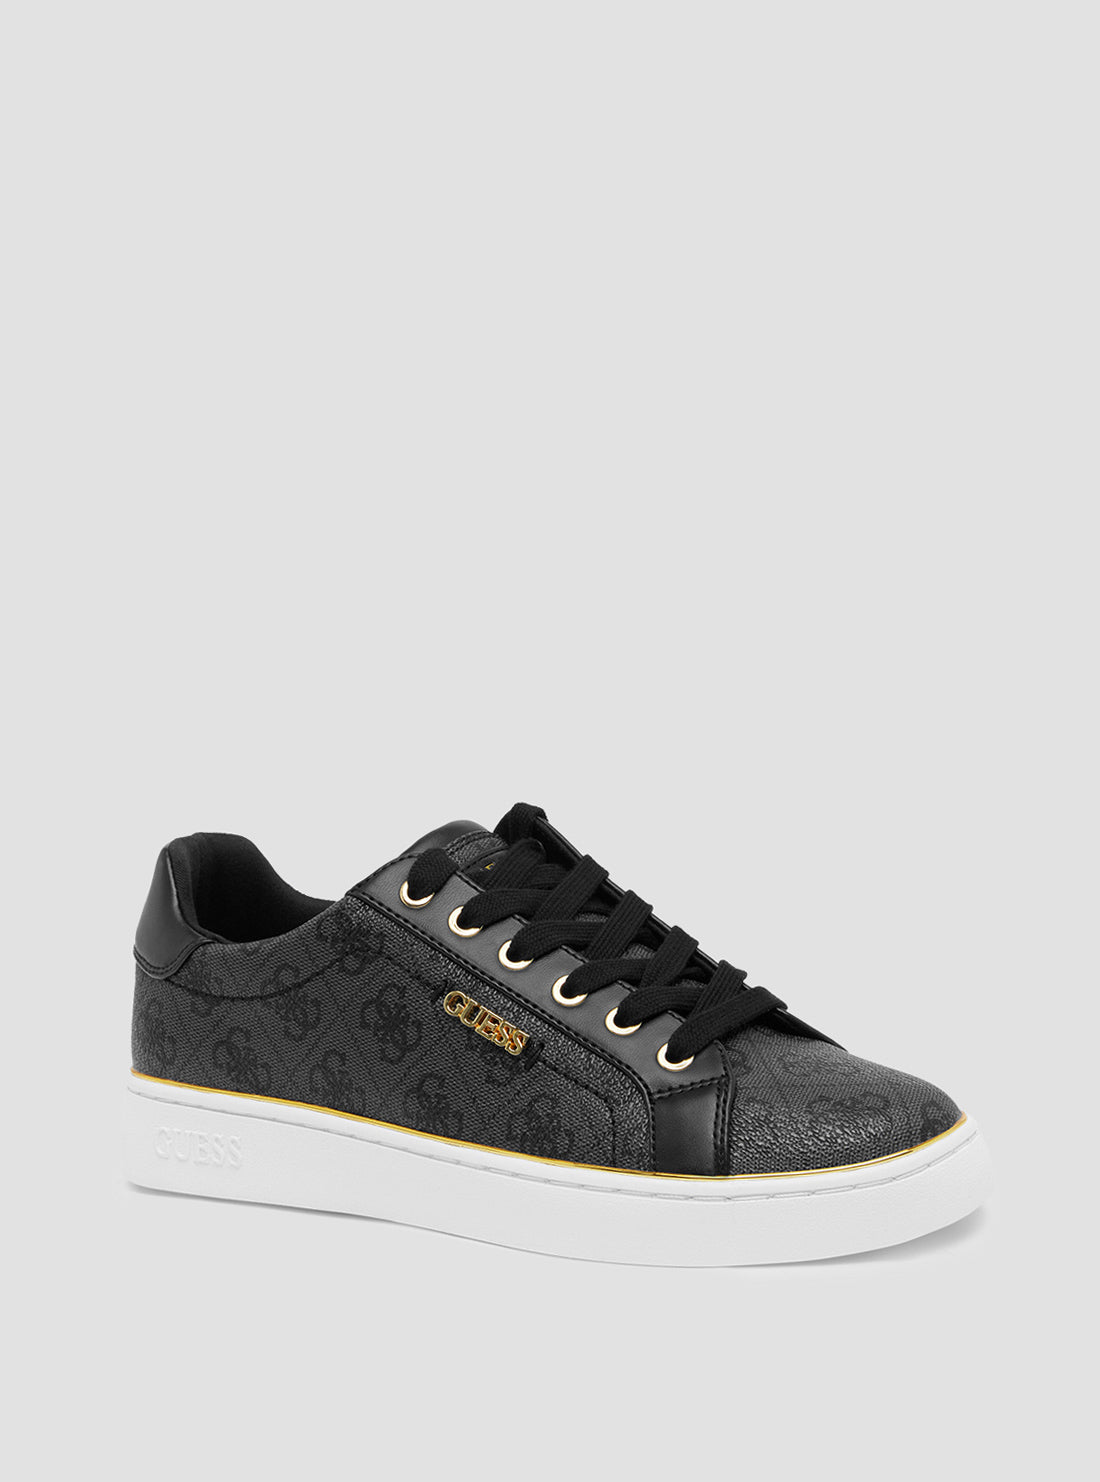 Black Logo Beckie Sneakers | GUESS Women's Shoes | front view